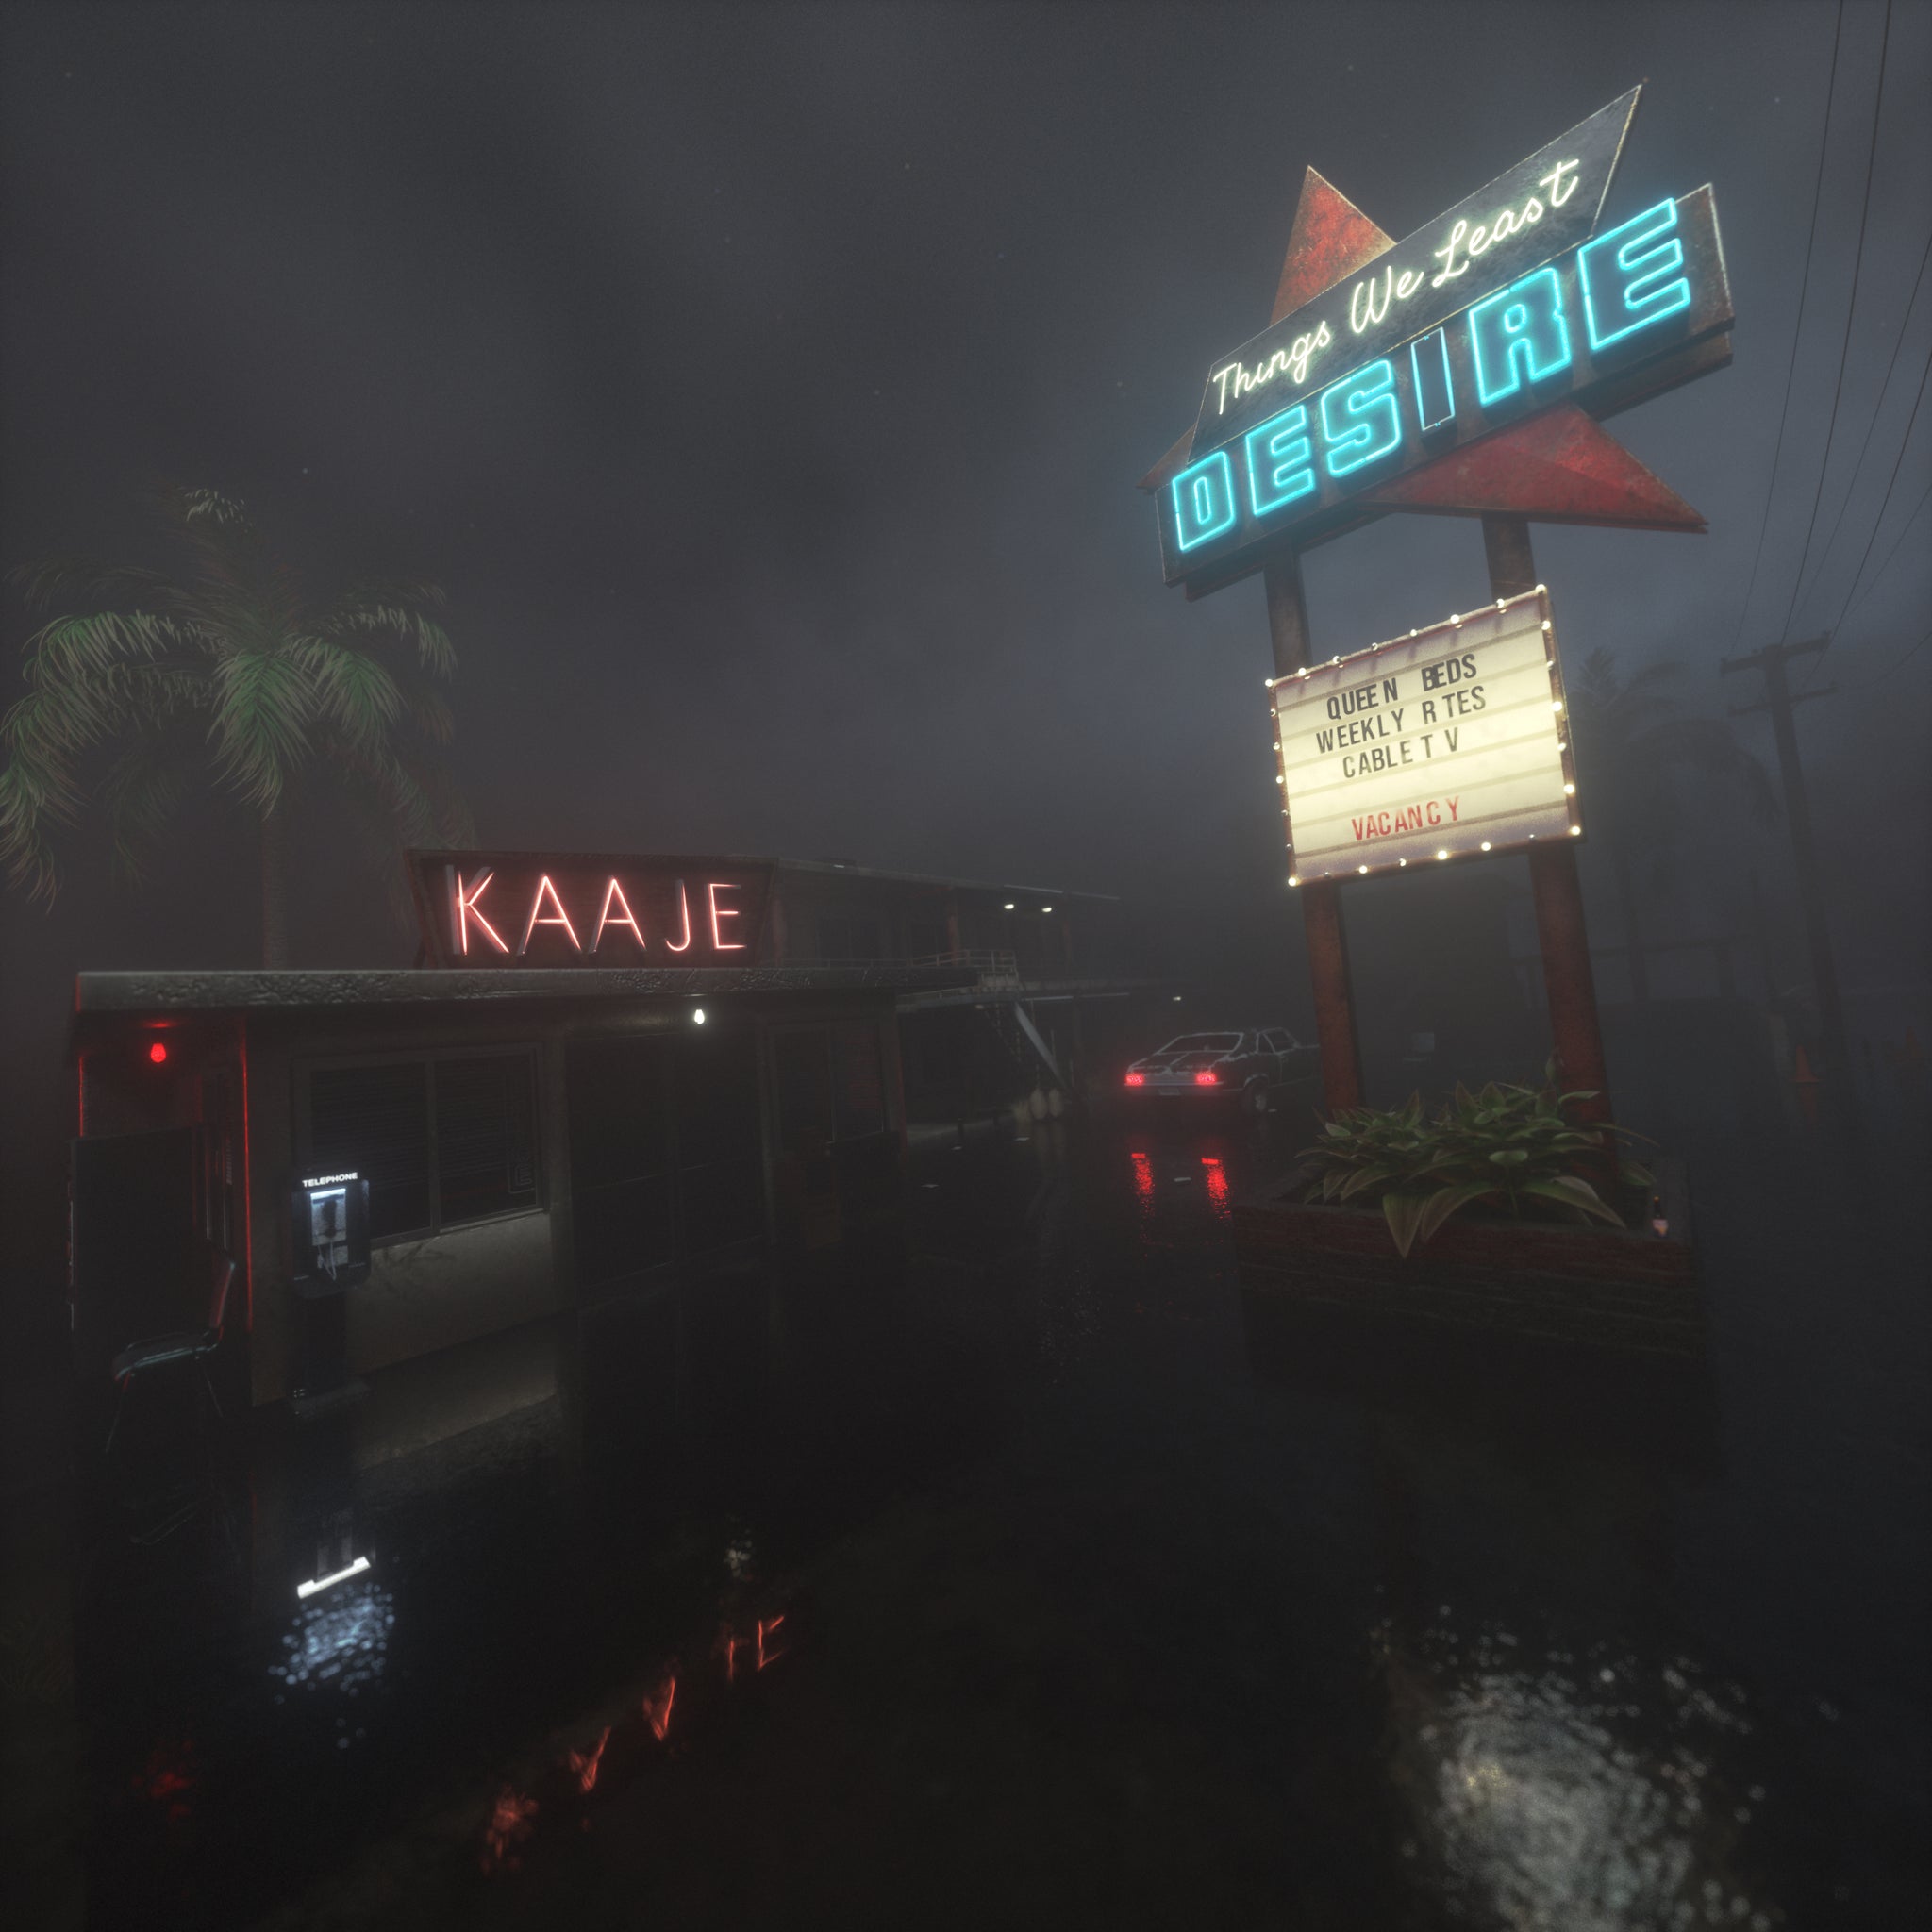 'KAAJE!!  Things We Least Desire Media'  text used on a pop up diner in the fog at night